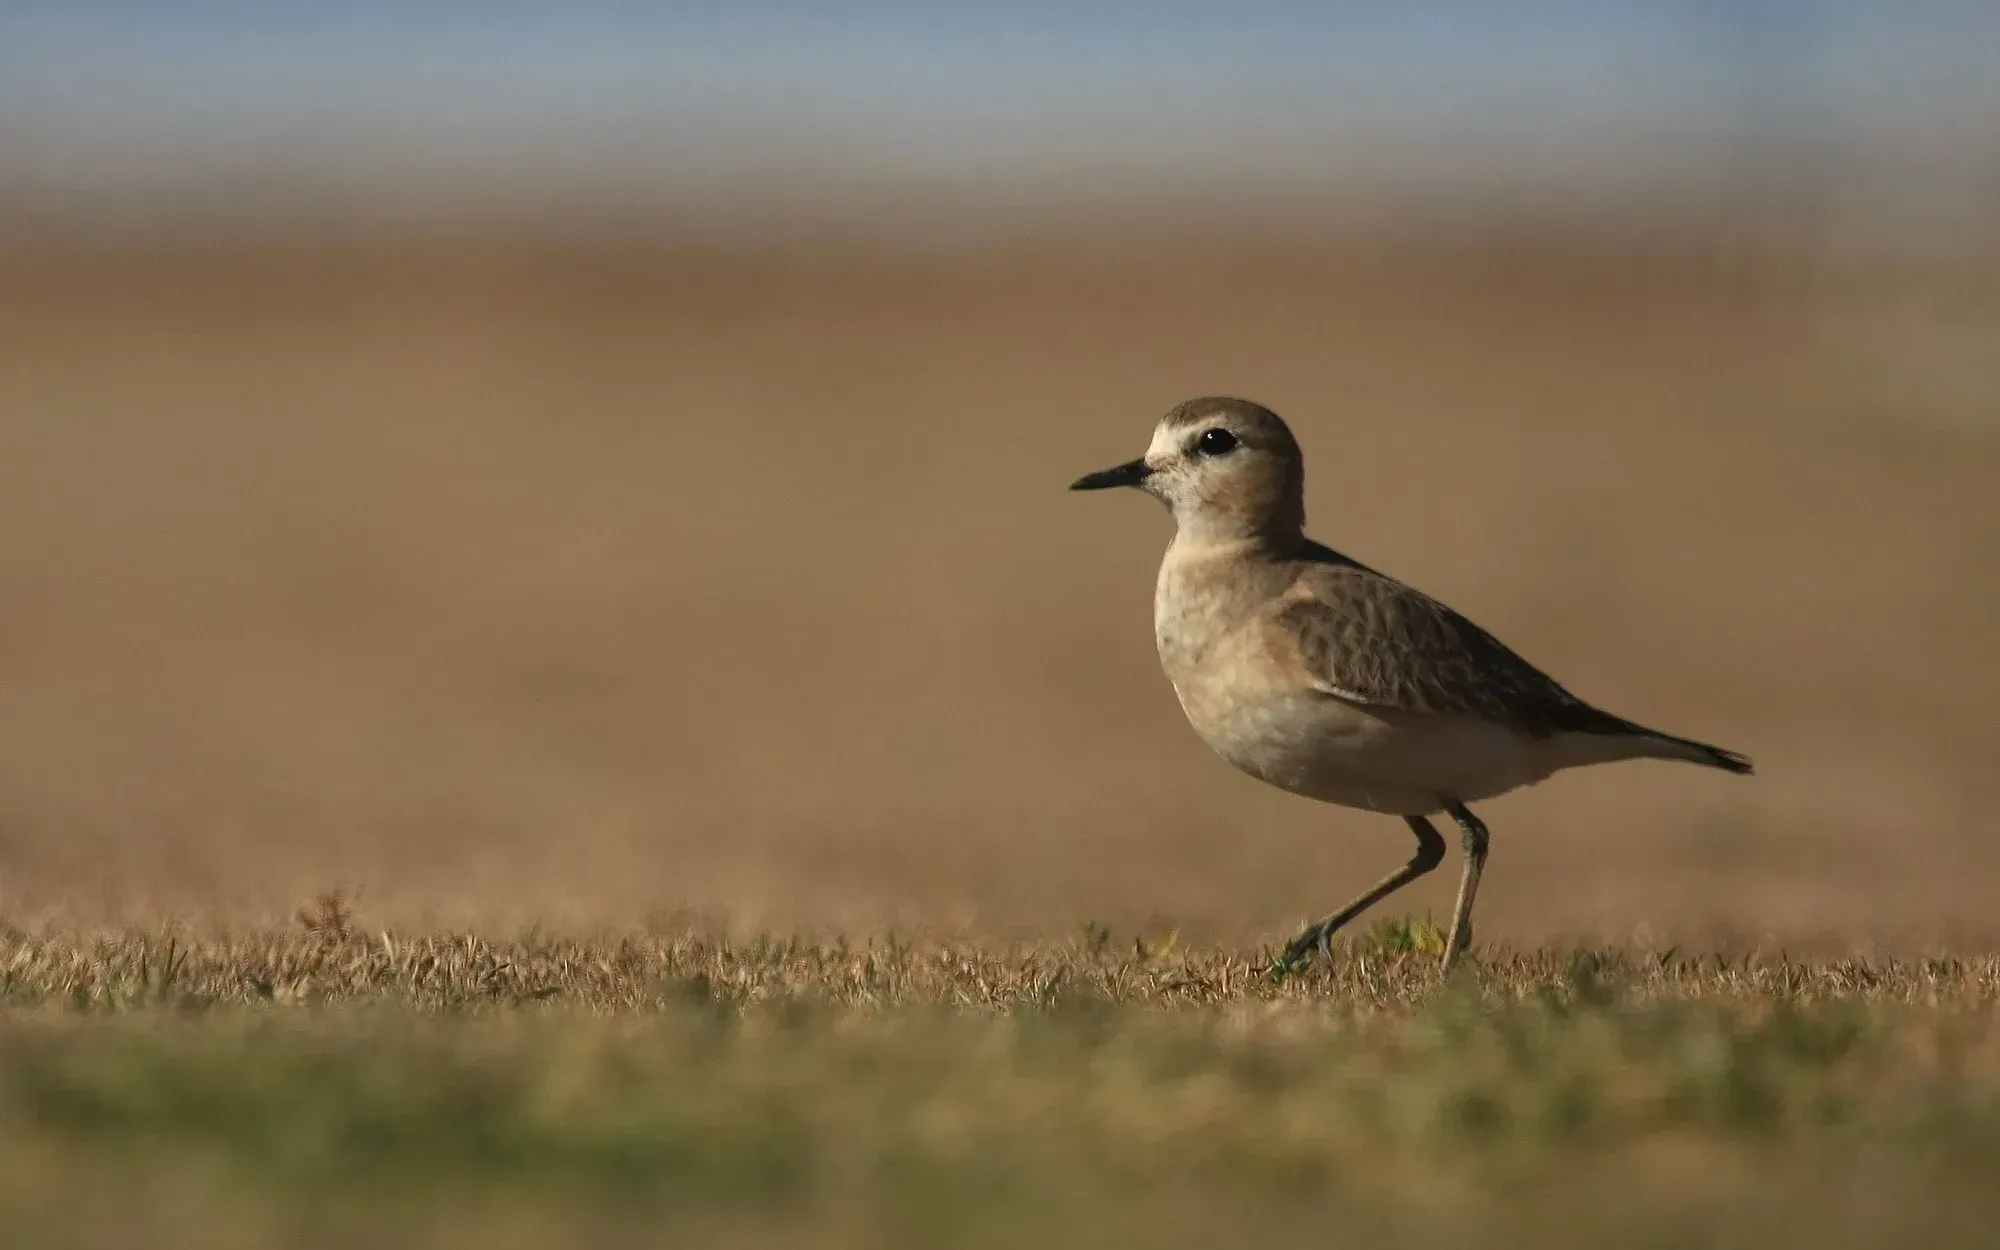 A mountain plover in a field.